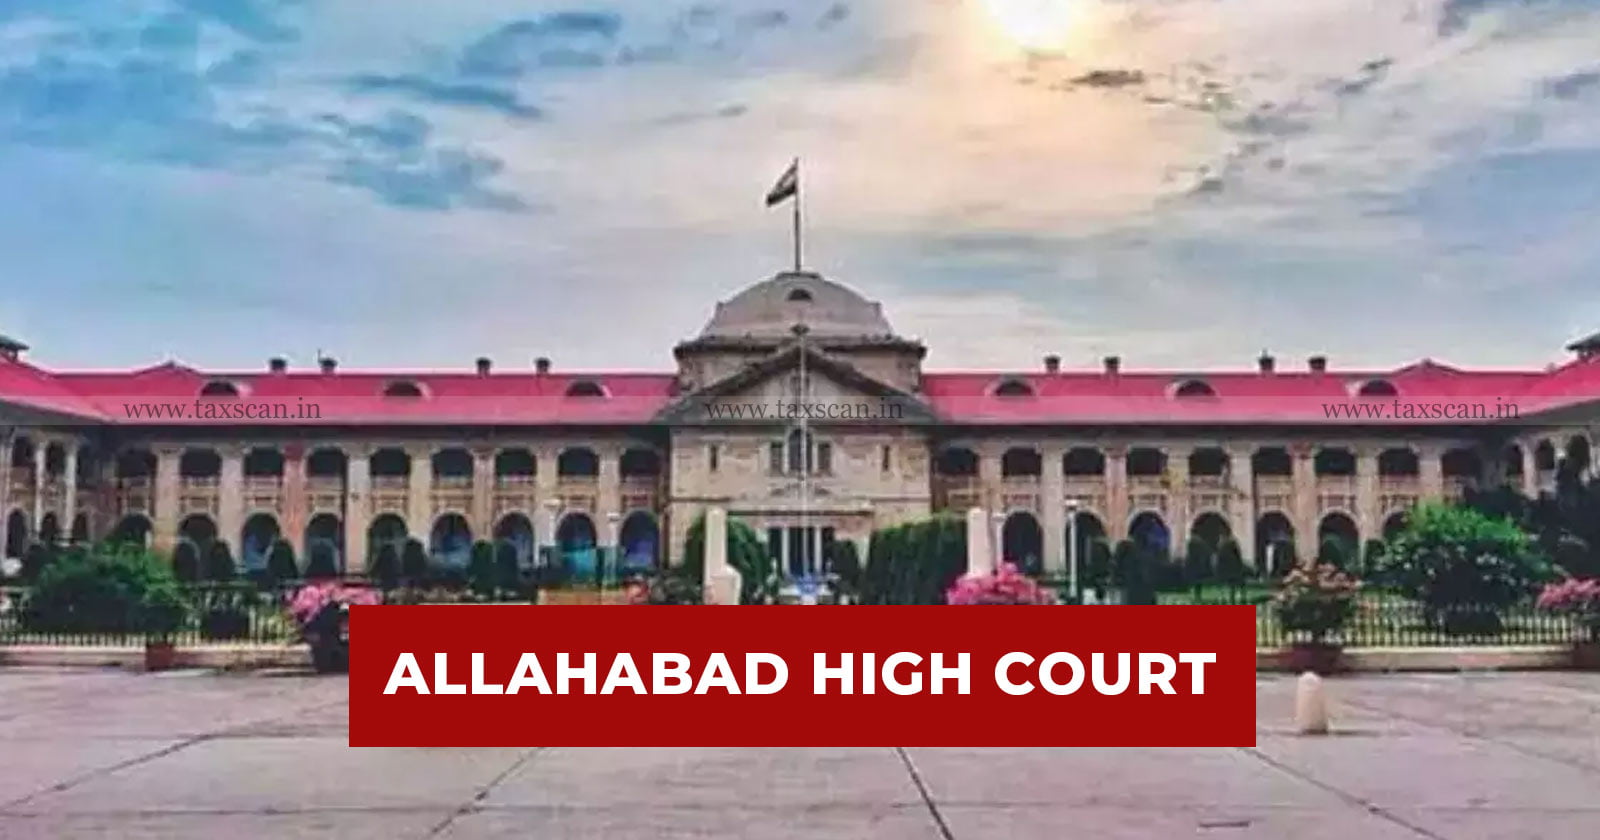 Tax-demand-on-Undisclosed-Sale-Allahabad-HC-TAXSCANGST - GST Act - UPGST Act - Evade Tax - Allahabad High Court - Allahabad High Court tax penalty news - Unintentional tax evasion consequences - taxscan